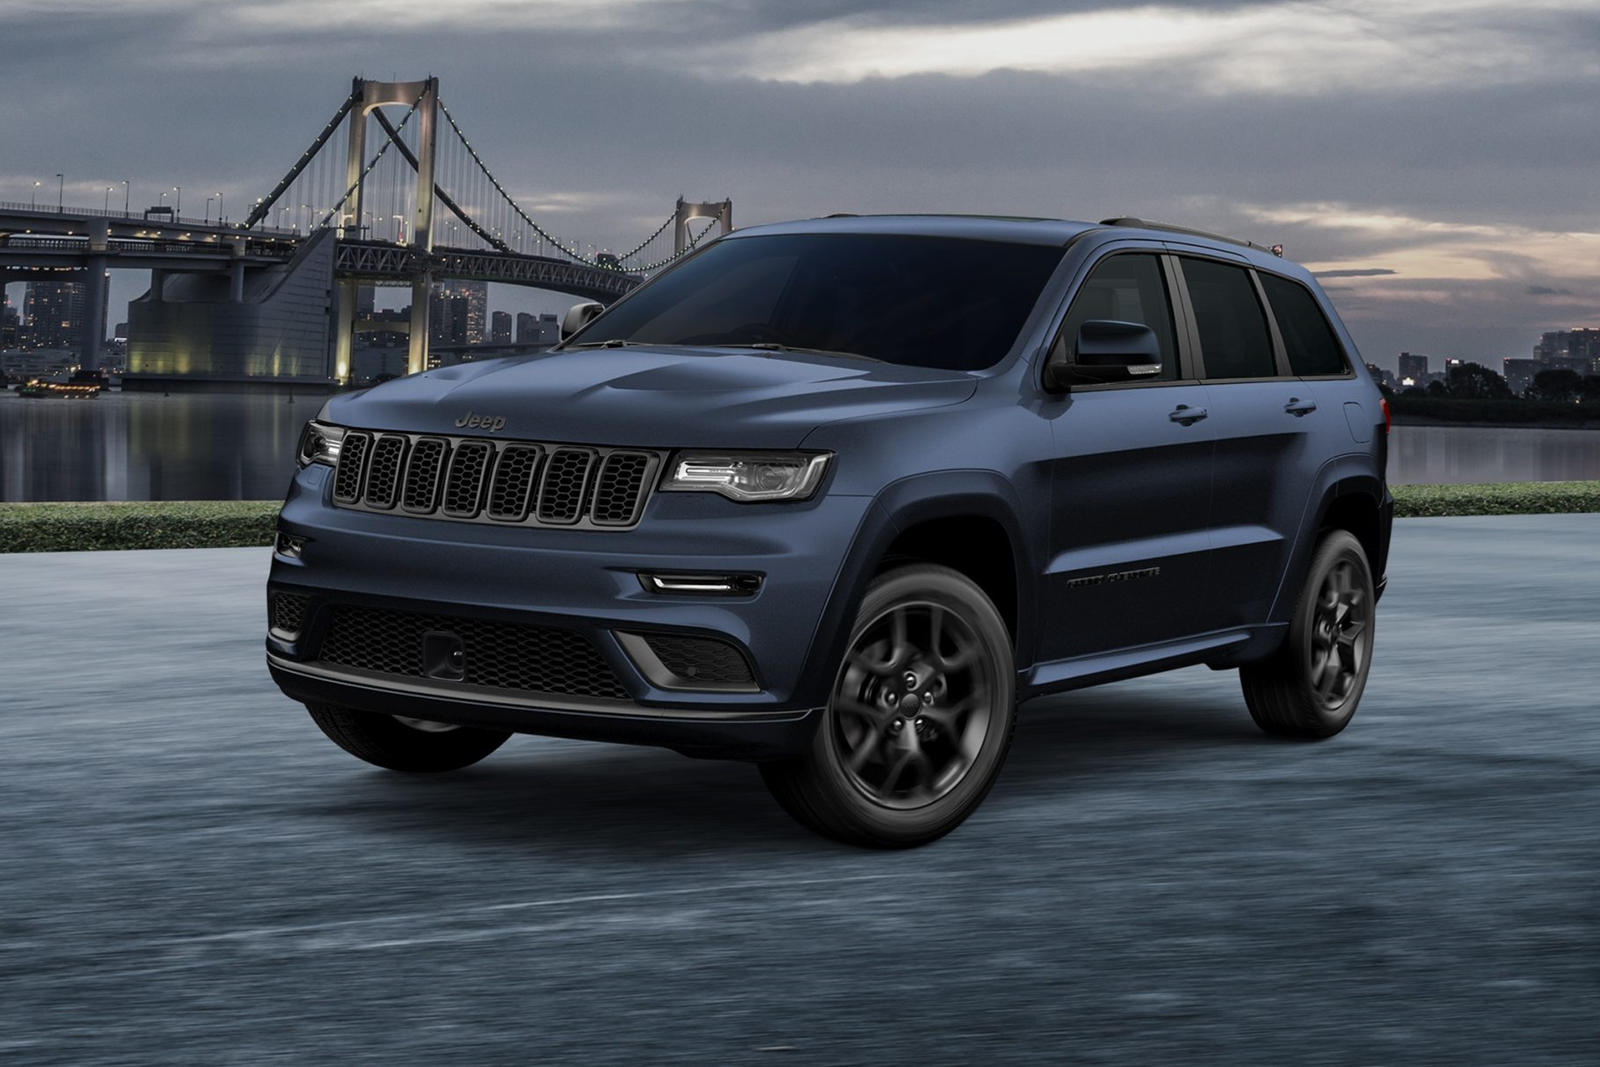 New Jeep Grand Cherokee SLimited Looks Hot CarBuzz